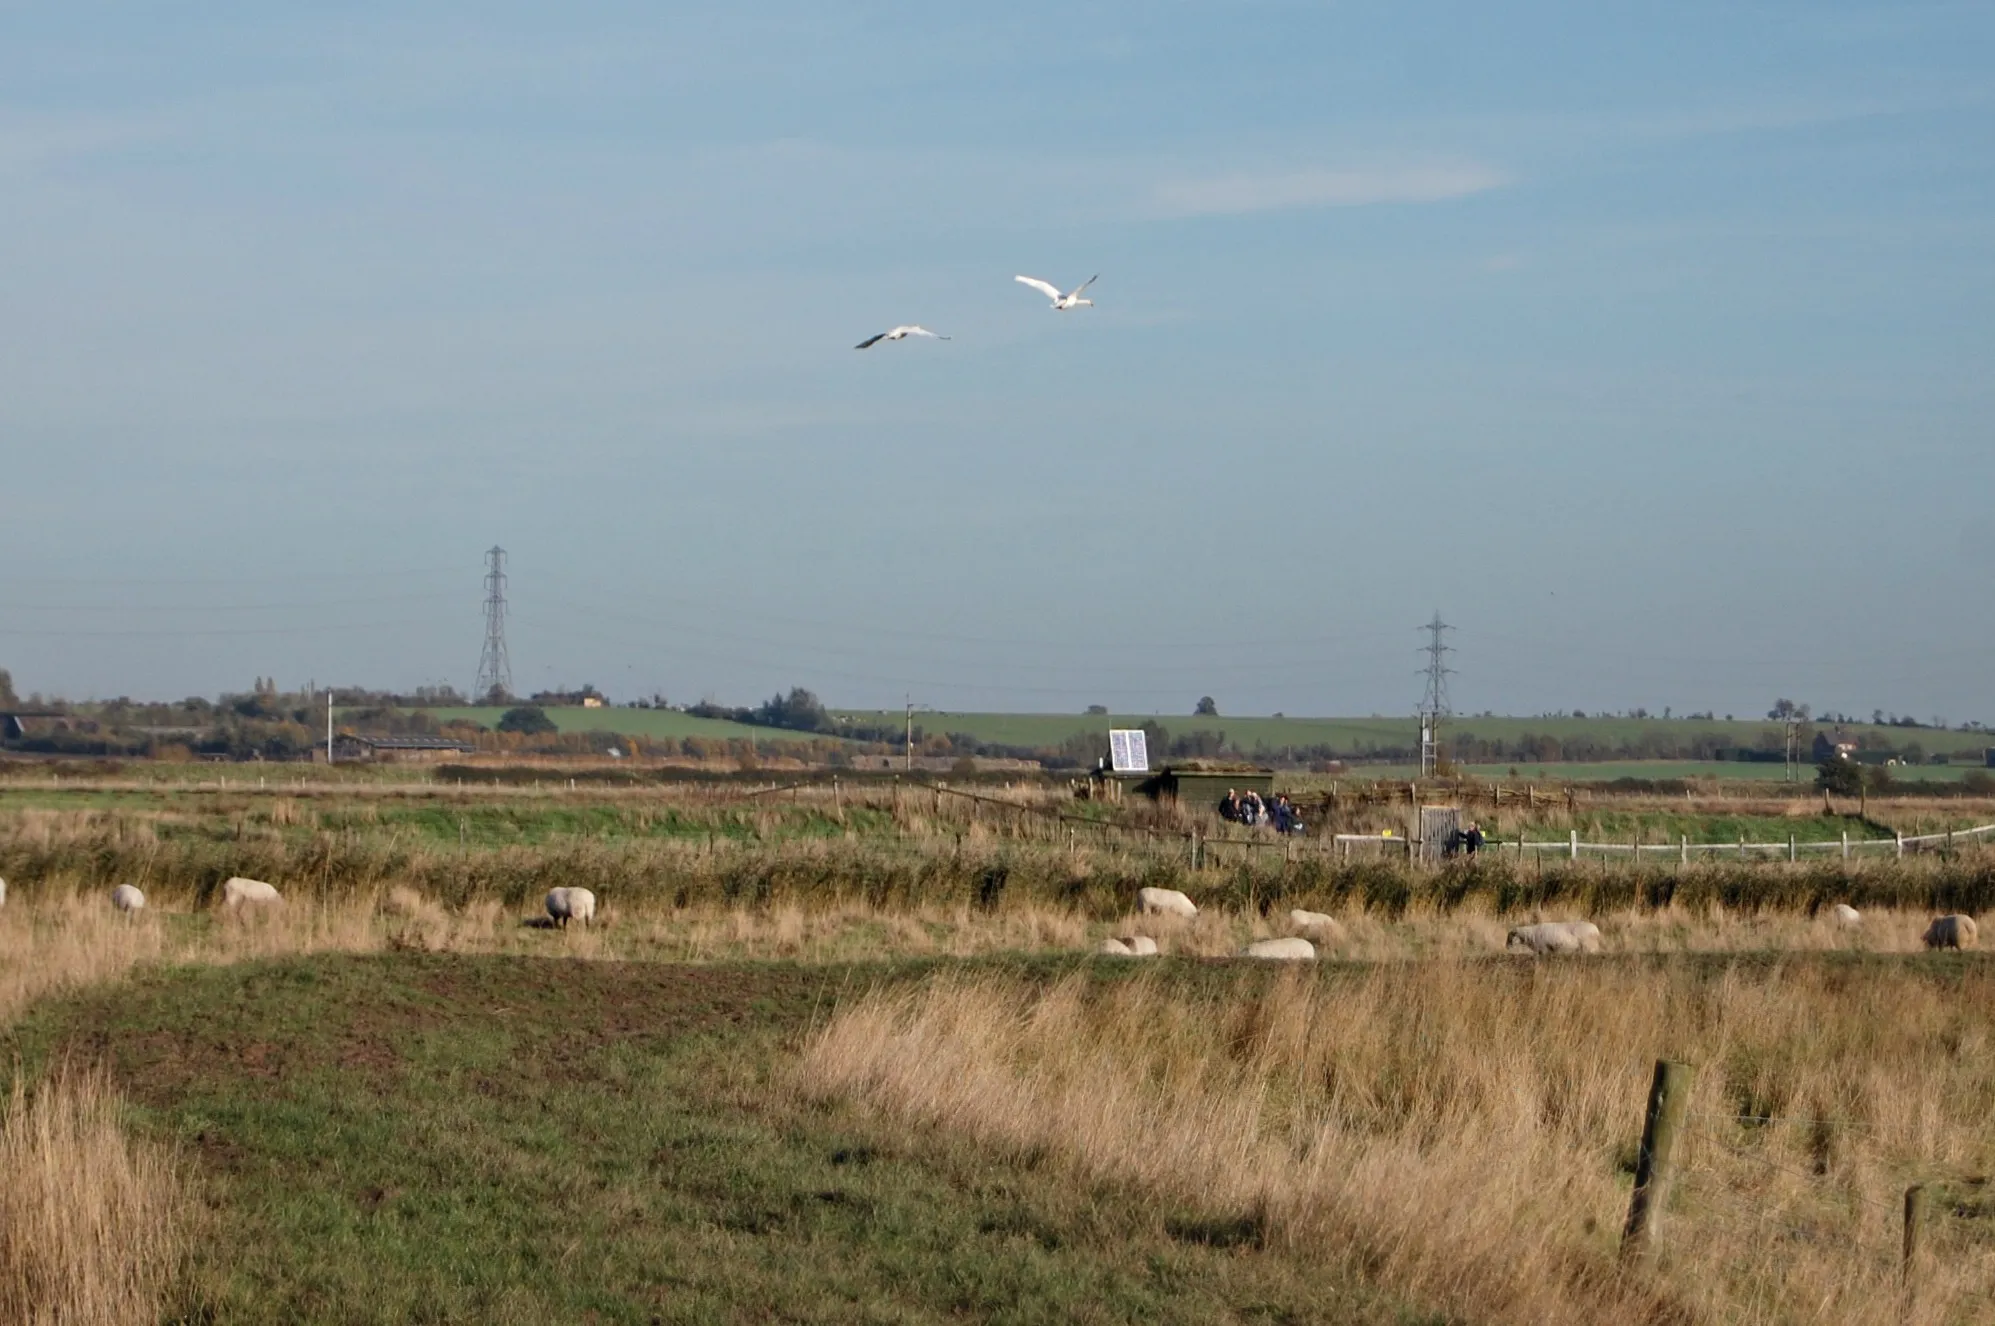 Photo showing: A flock of sheep, a brace of swans and a hide of bird-watchers